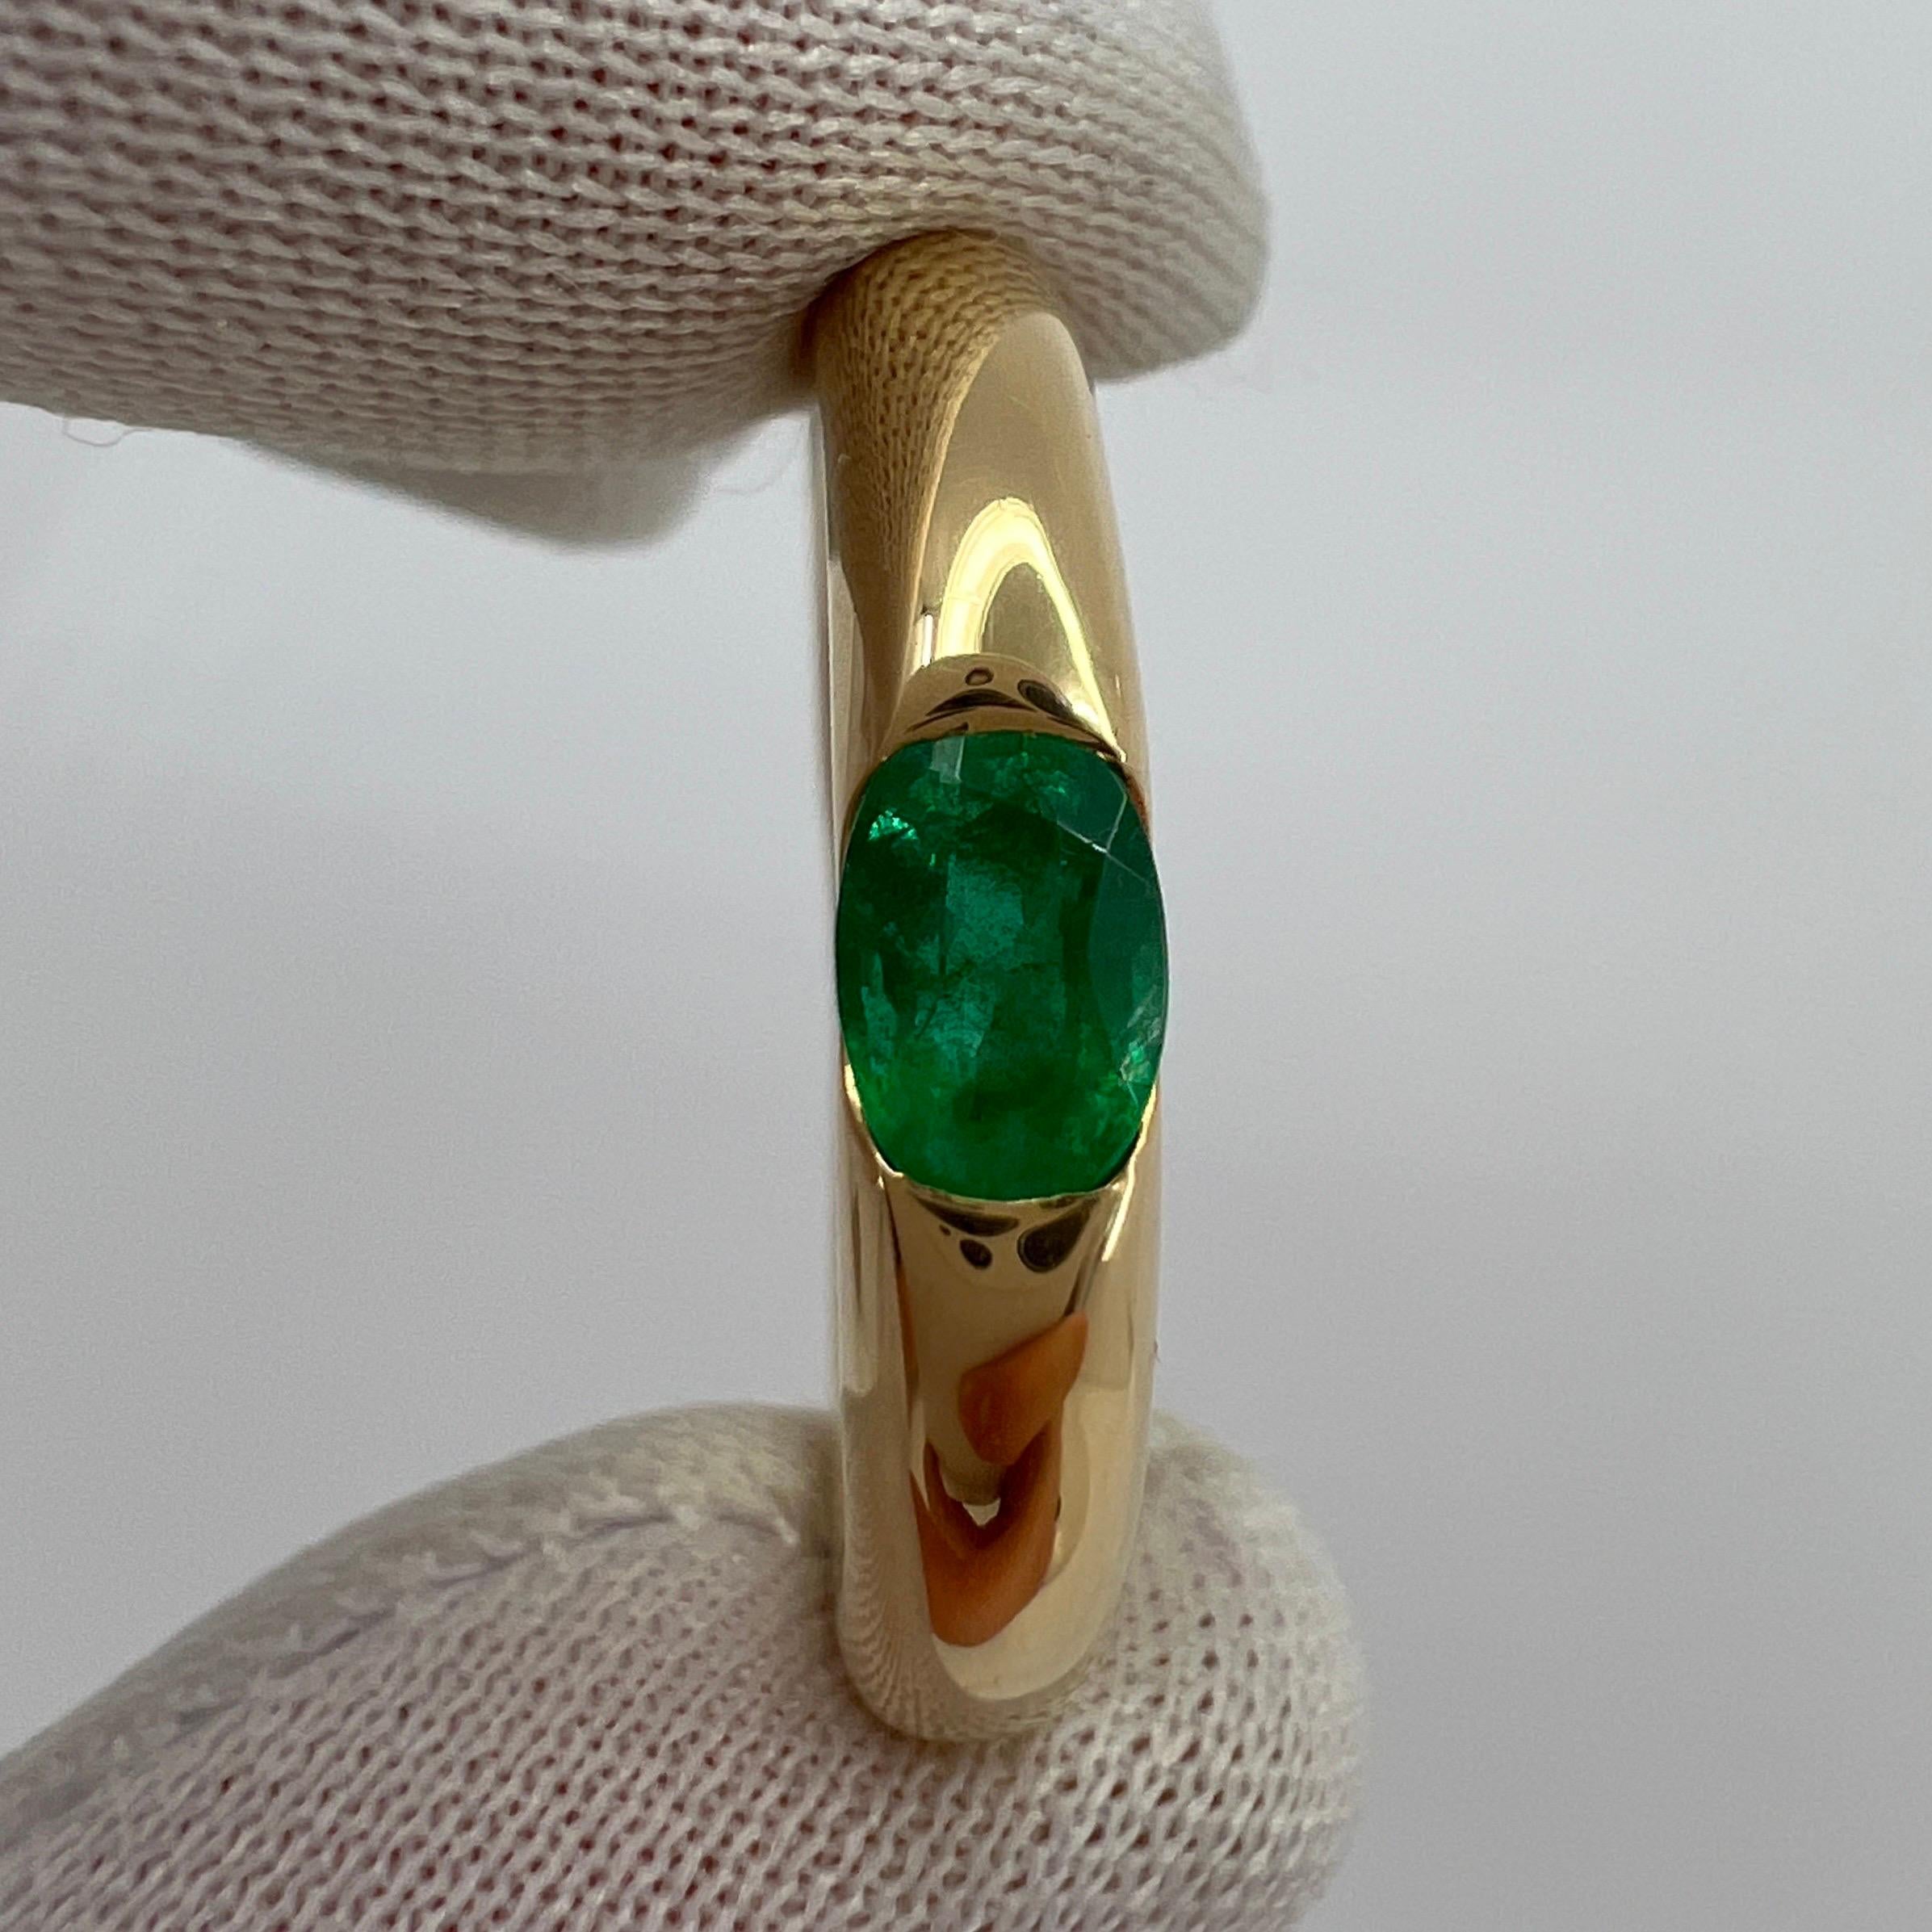 Vintage Cartier Vivid Green Emerald Ellipse 18k Yellow Gold Solitaire Ring 2